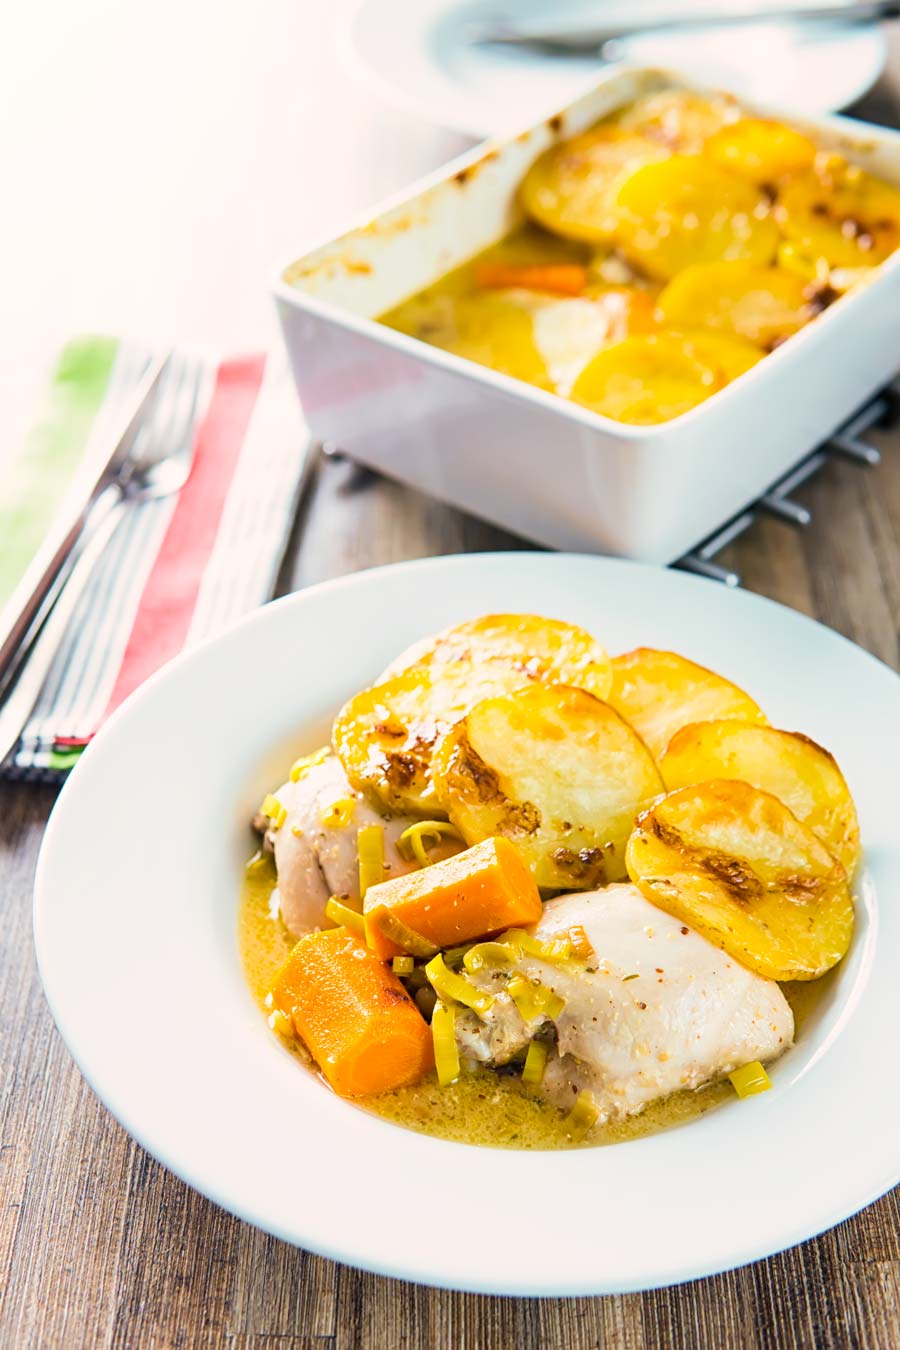 A hotpot is a little like a pie with a scalloped potato topping, this chicken hotpot features a mustard sauce and lots of leeks and carrots.